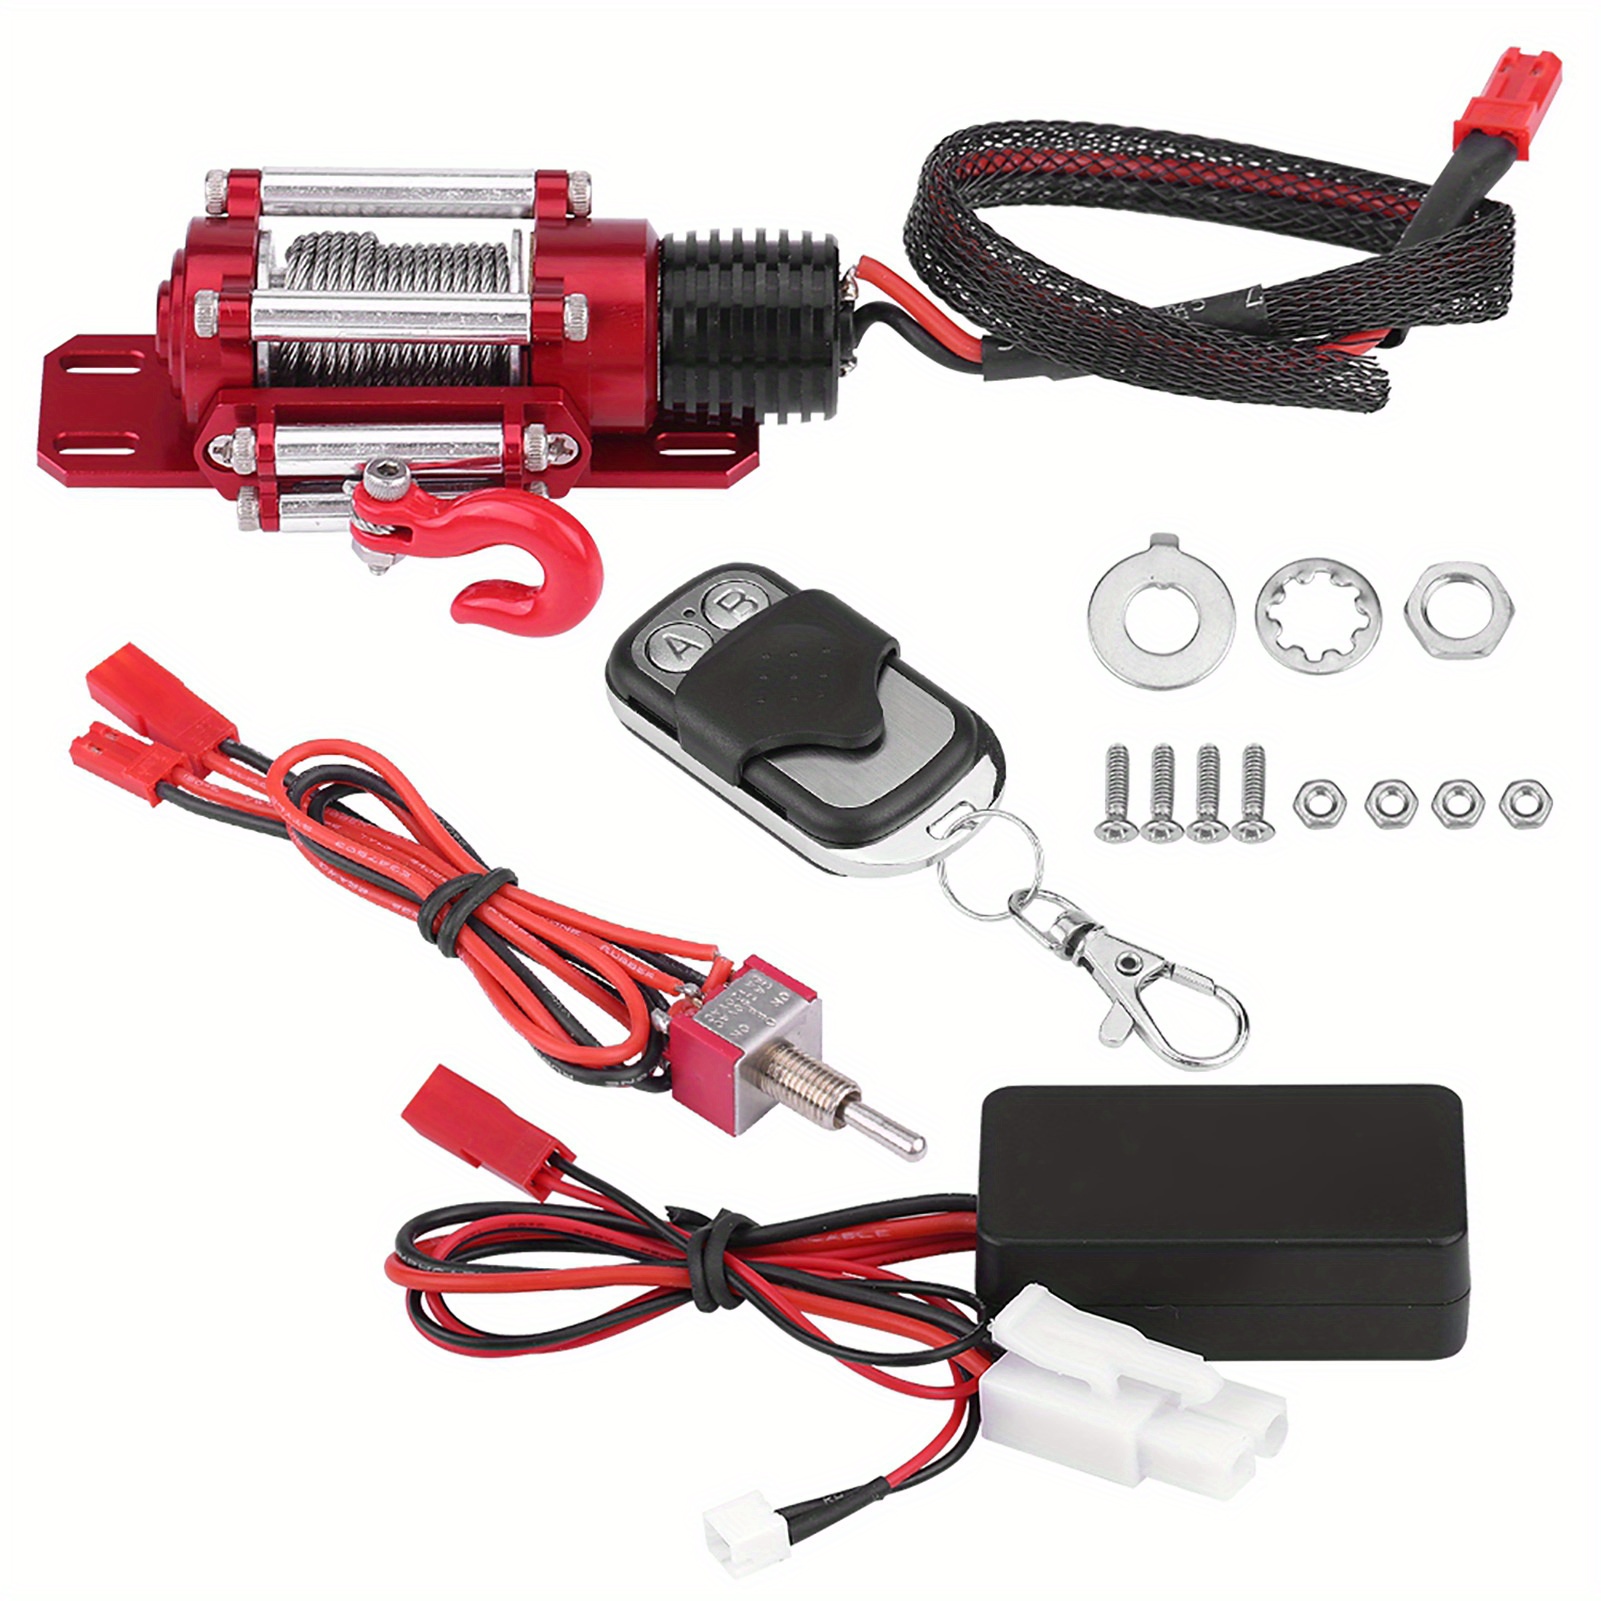 

1/10 Scale Rc Model Vehicle Crawler Car Accessory Metal Winch With Remote Controller